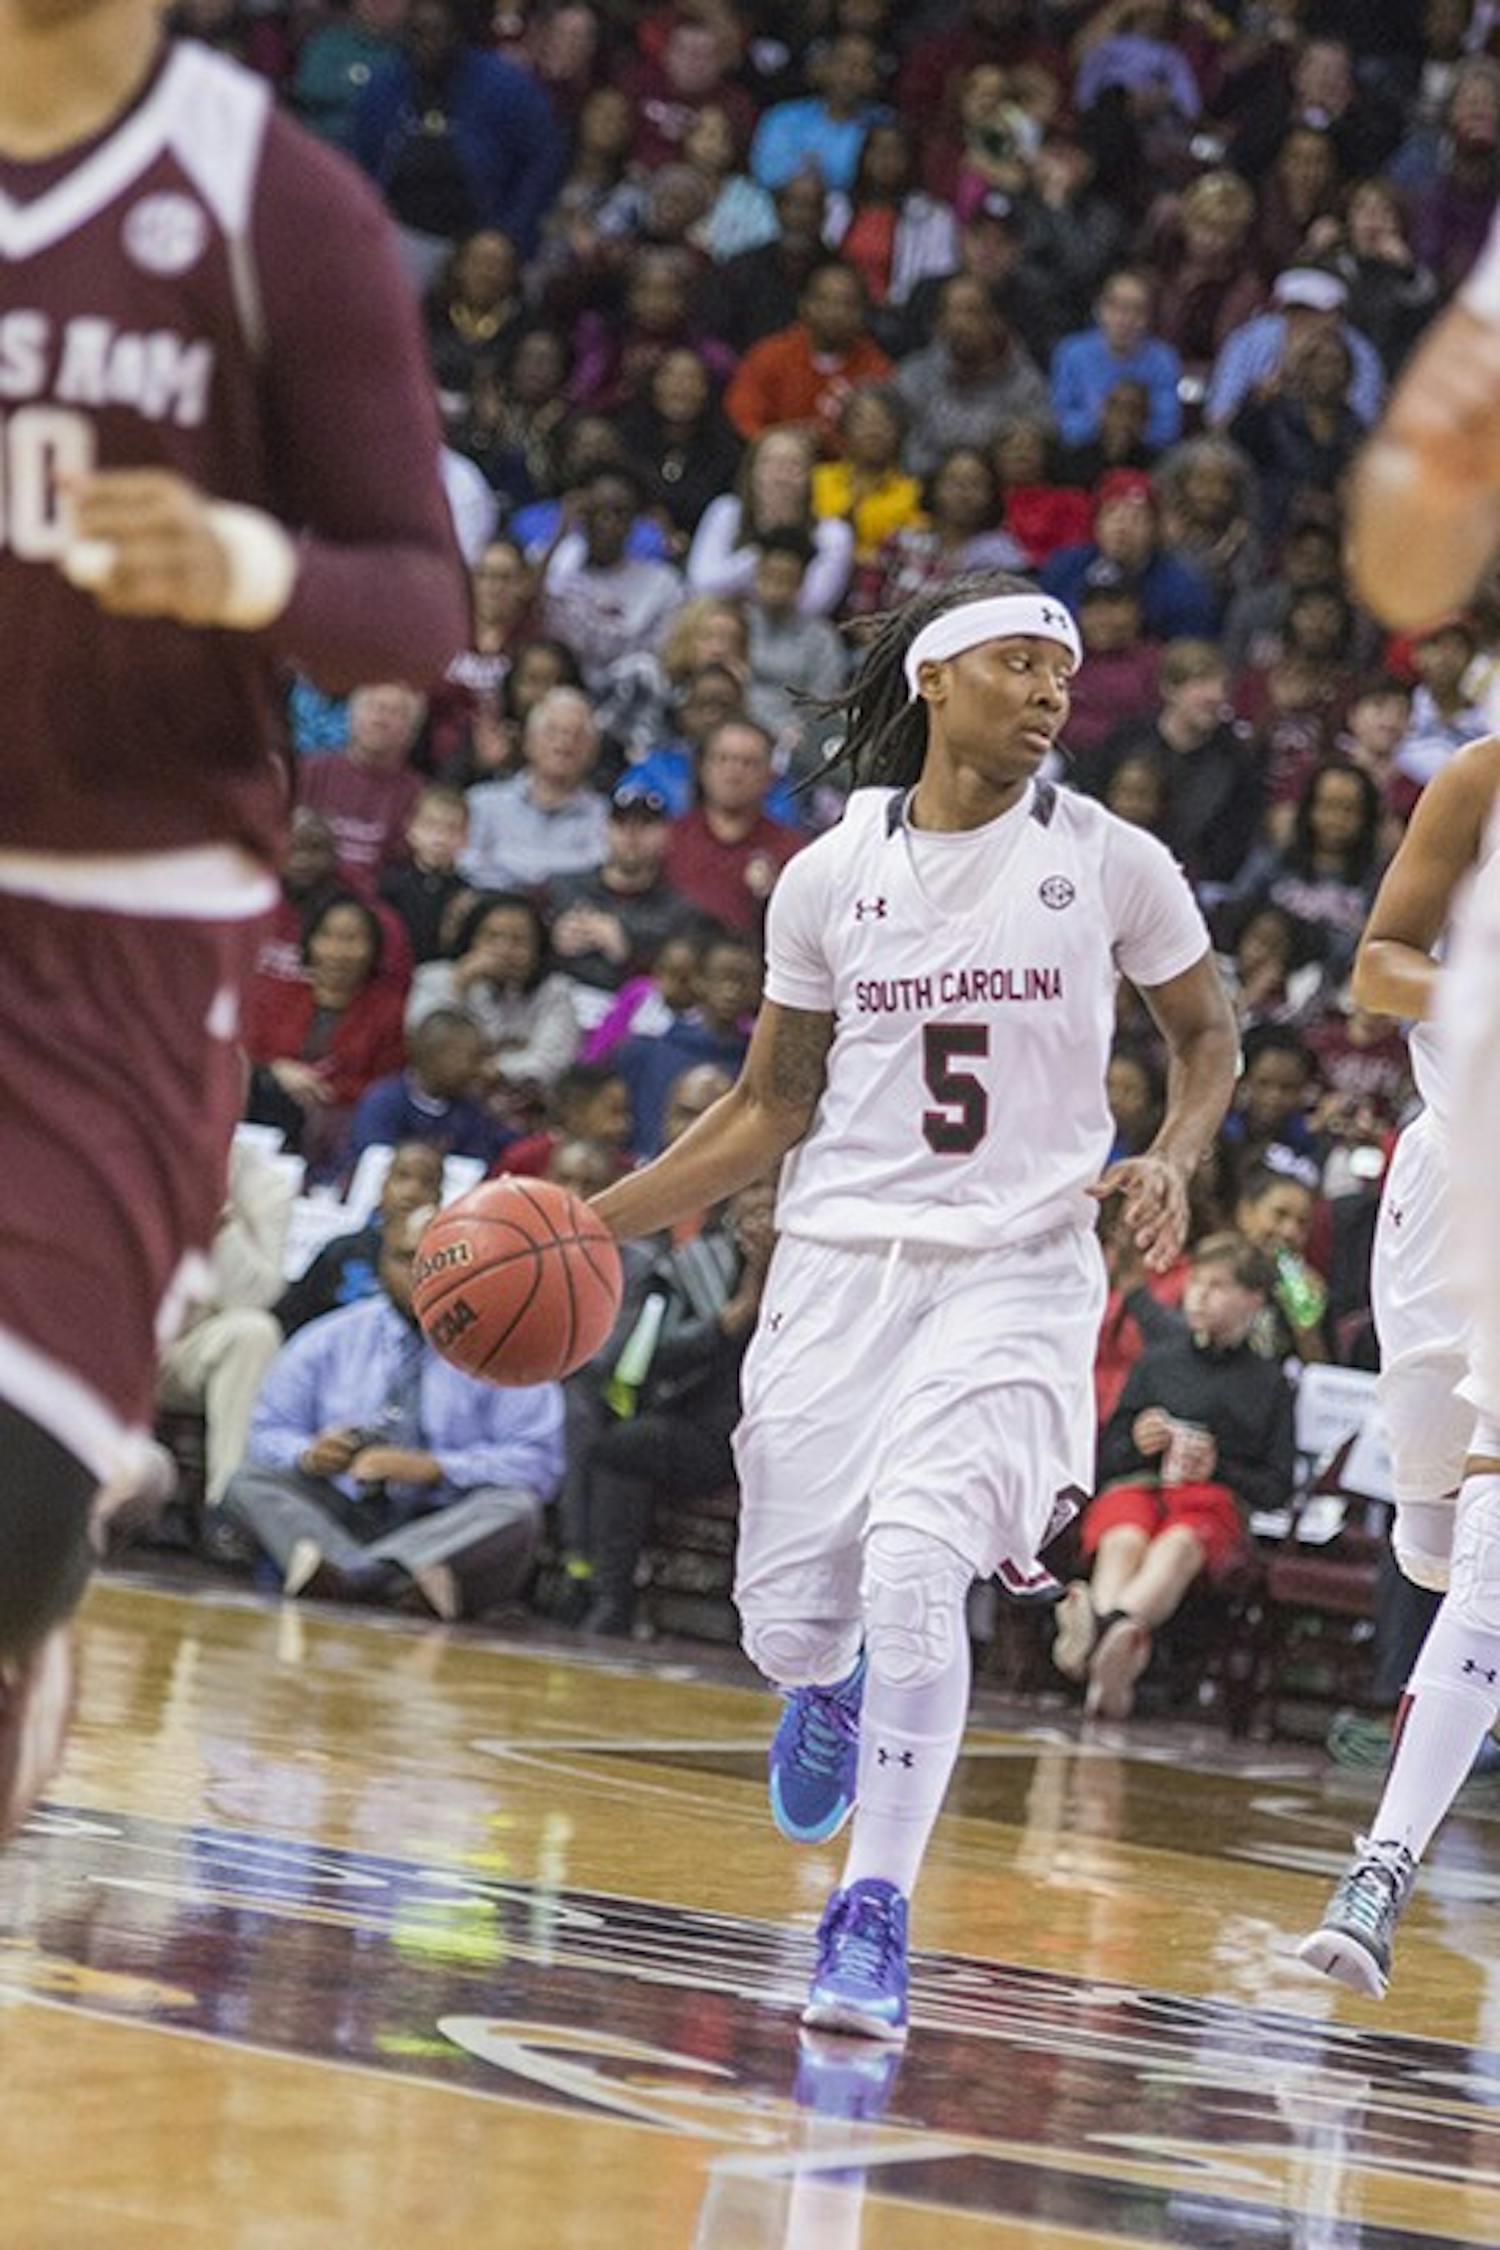 Guard Khadijah Sessions played a key role in South Carolina's victory over Alabama.